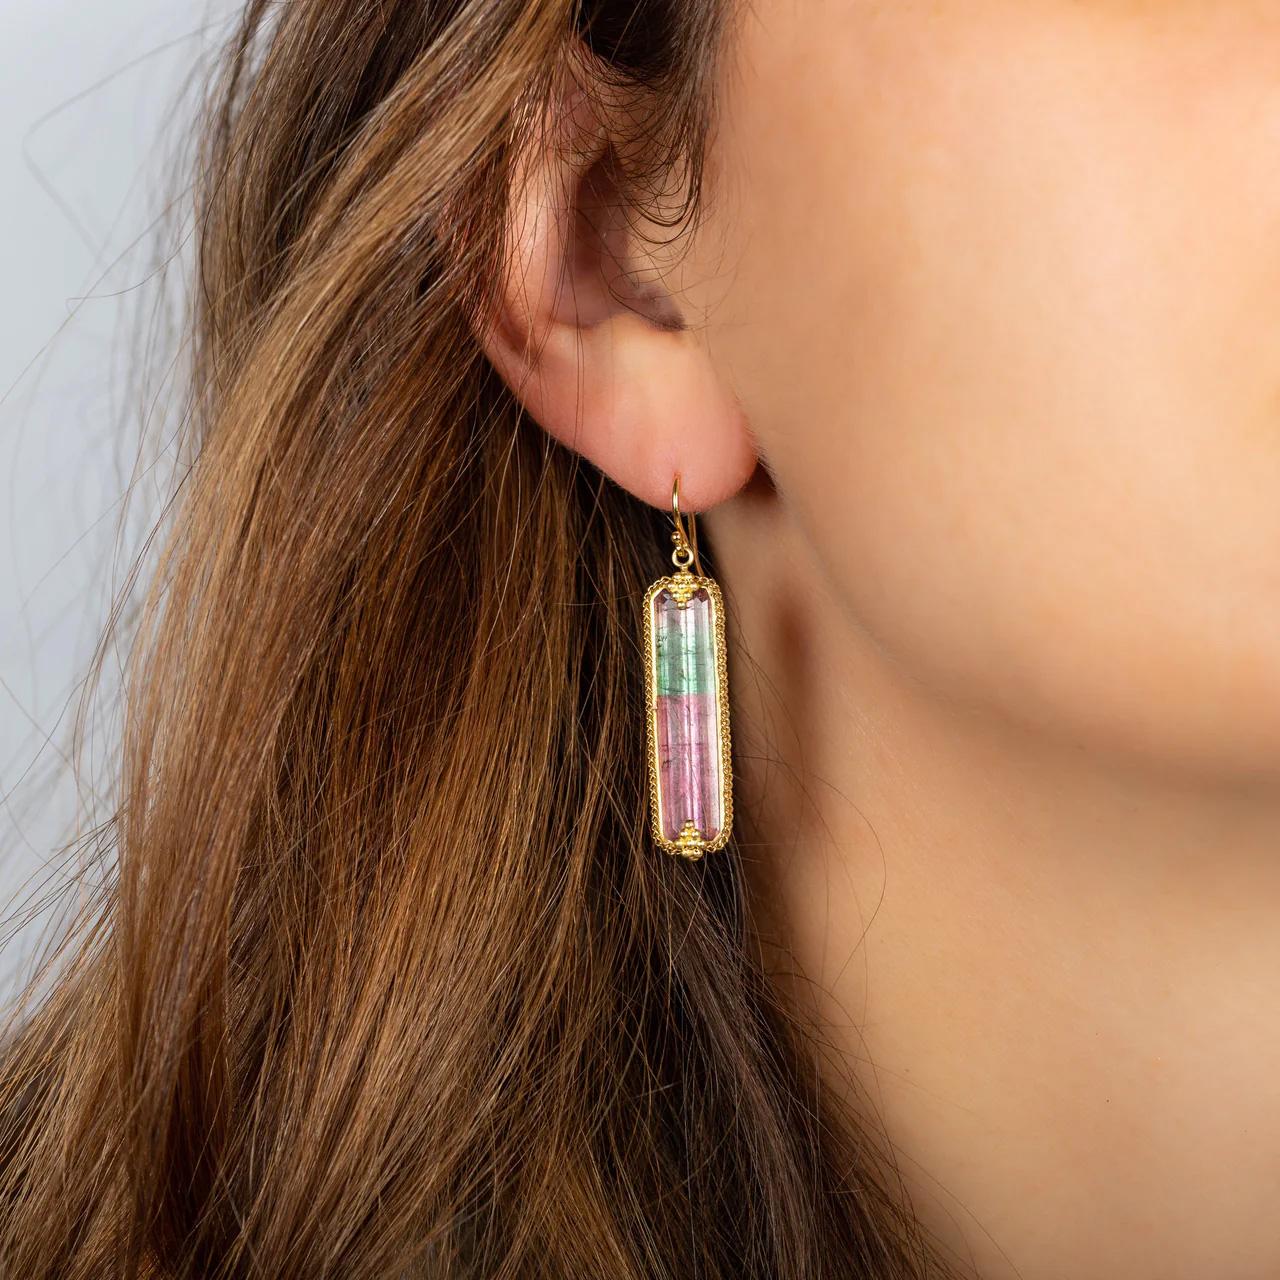 The colors in these Tourmaline earrings are as soft and lovely as the first glimpse of dawn, when tender new sunlight filters gently though a sky veiled in wisps of morning mist. Delicate pink below gives way to the subtle green of new spring growth